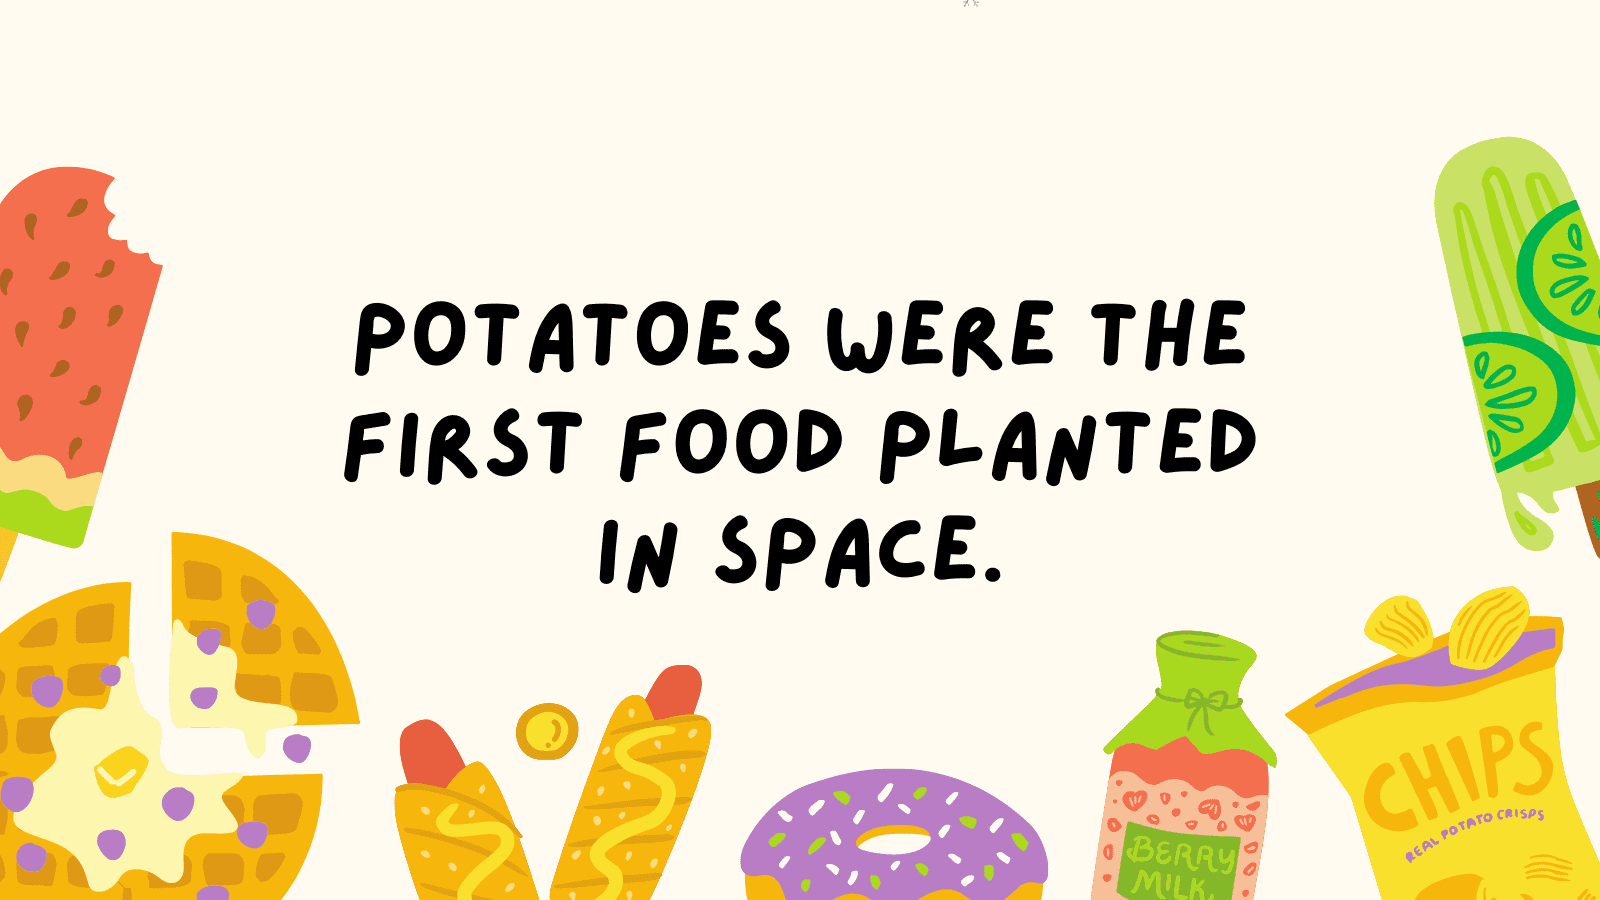 Weird Fun Facts About Food You Won’t Believe is True